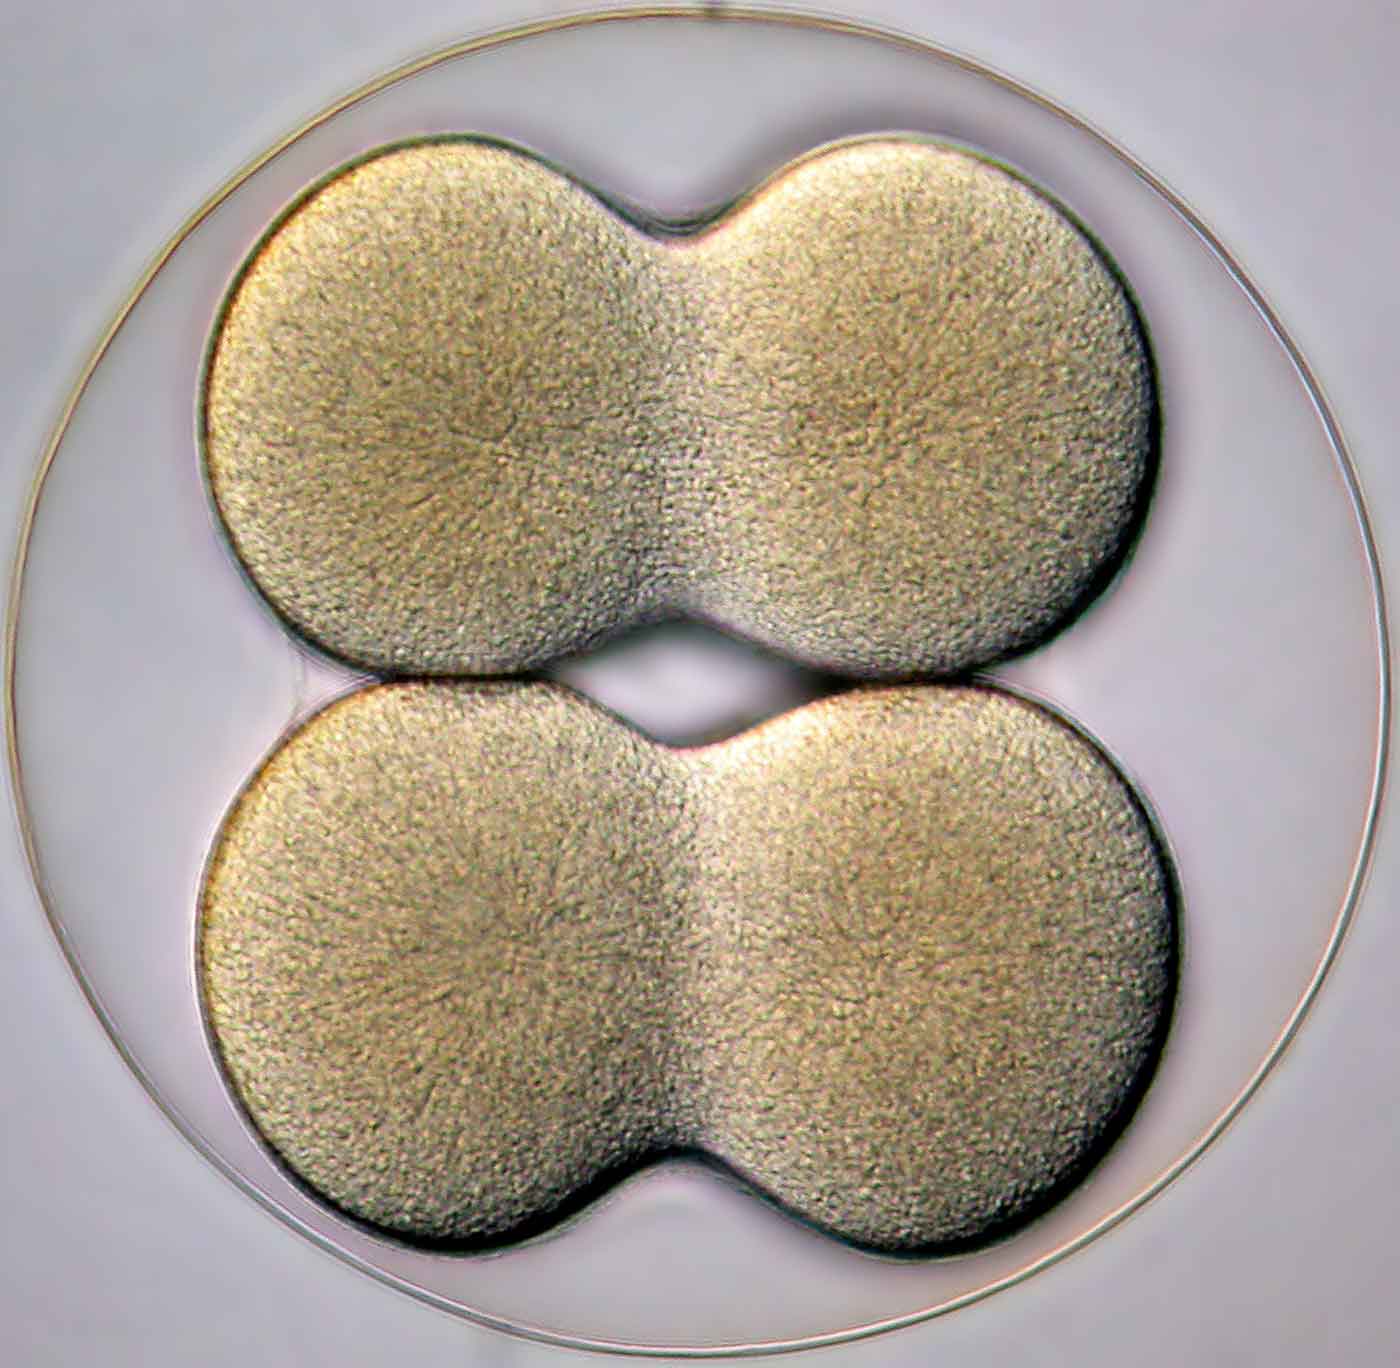 4-cell stage of a sea biscuit